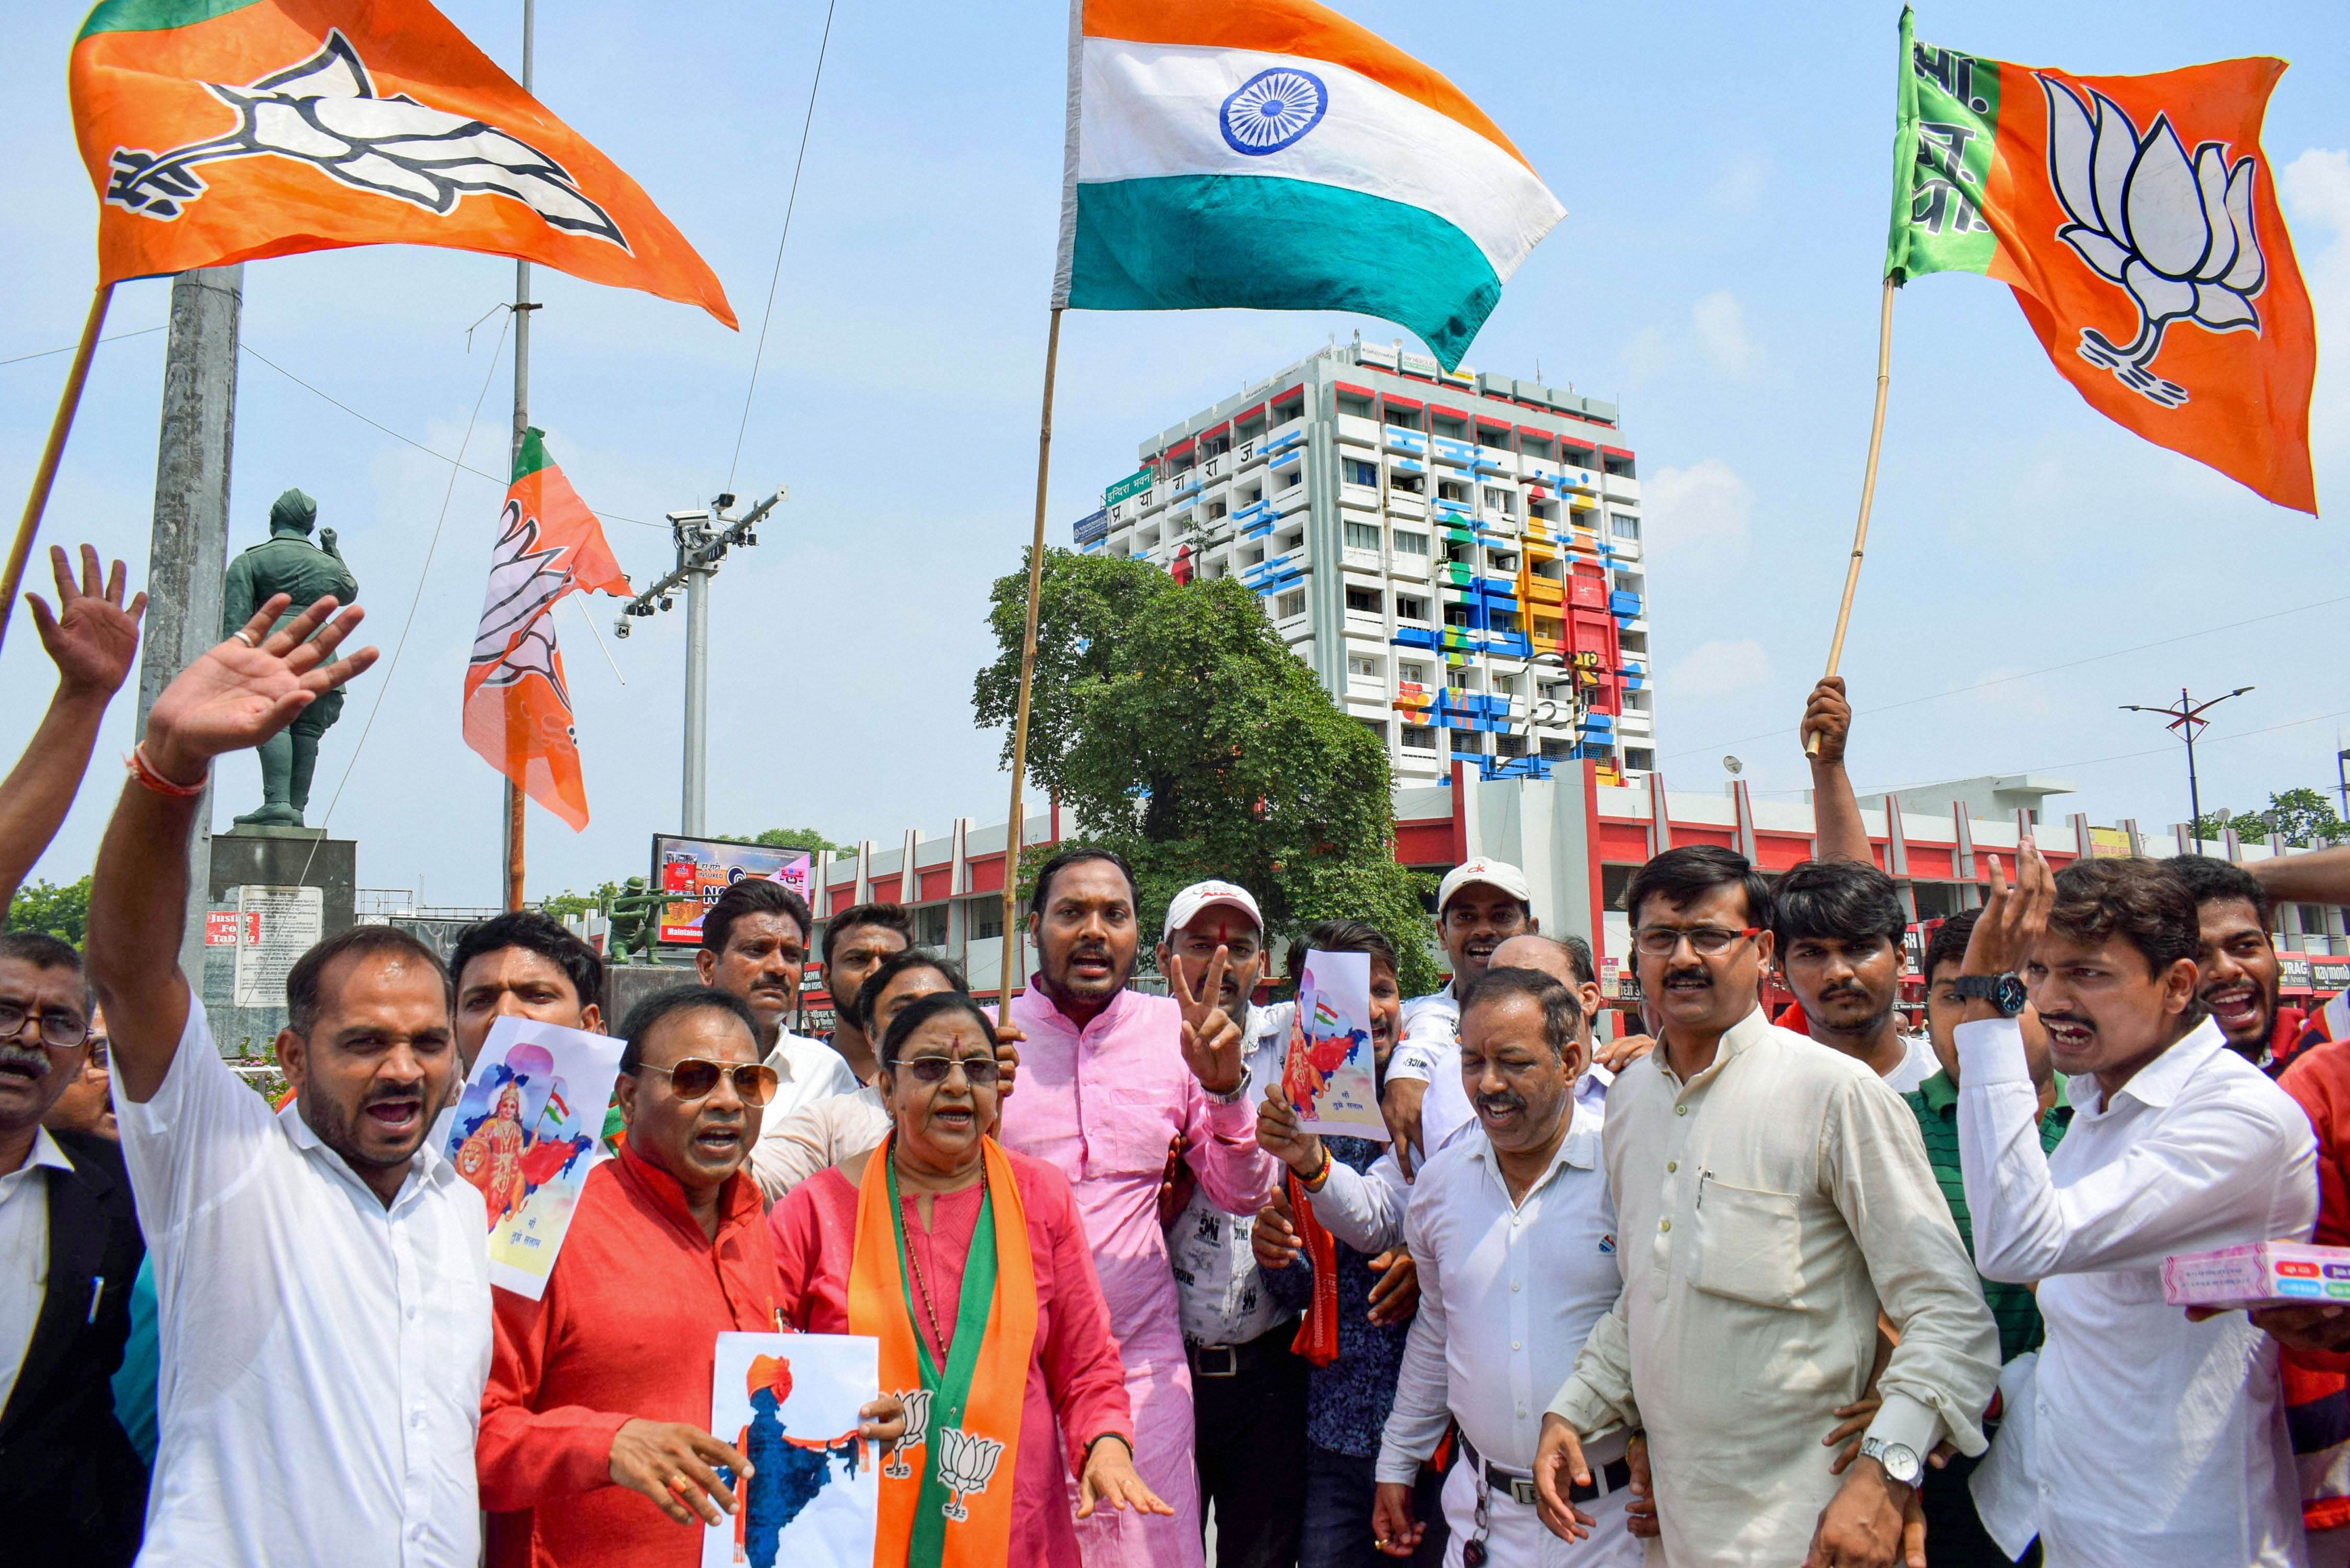 Bharatiya Janata Party workers celebrate government's decision to abolish Article 370 that gave special status to Jammu and Kashmir and moved a separate bill to bifurcate the state into two separate union territories of Jammu and Kashmir, and Ladakh. (PTI Photo)